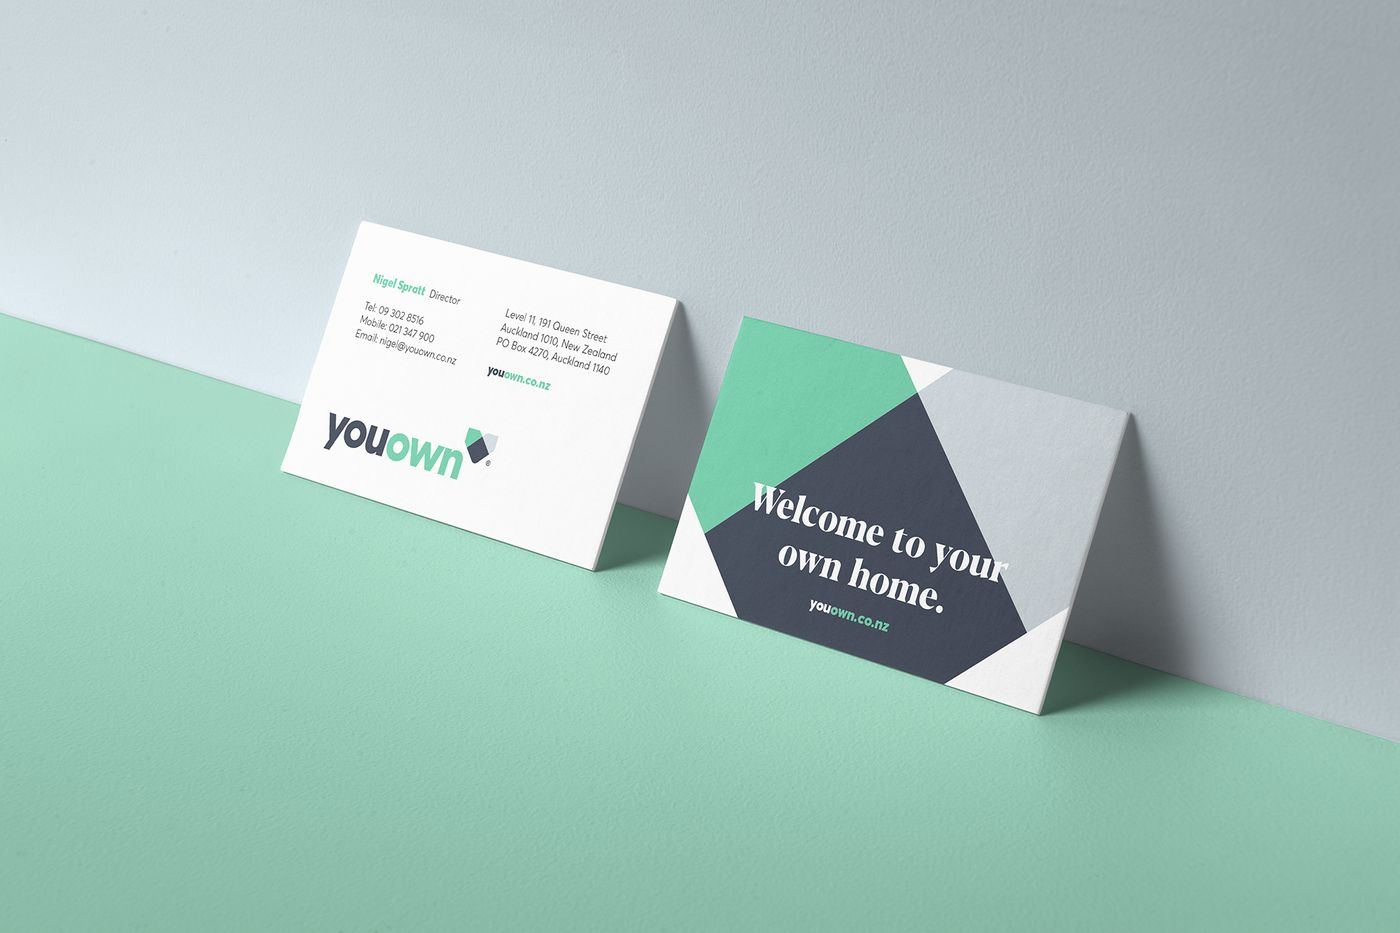 Youown business cards